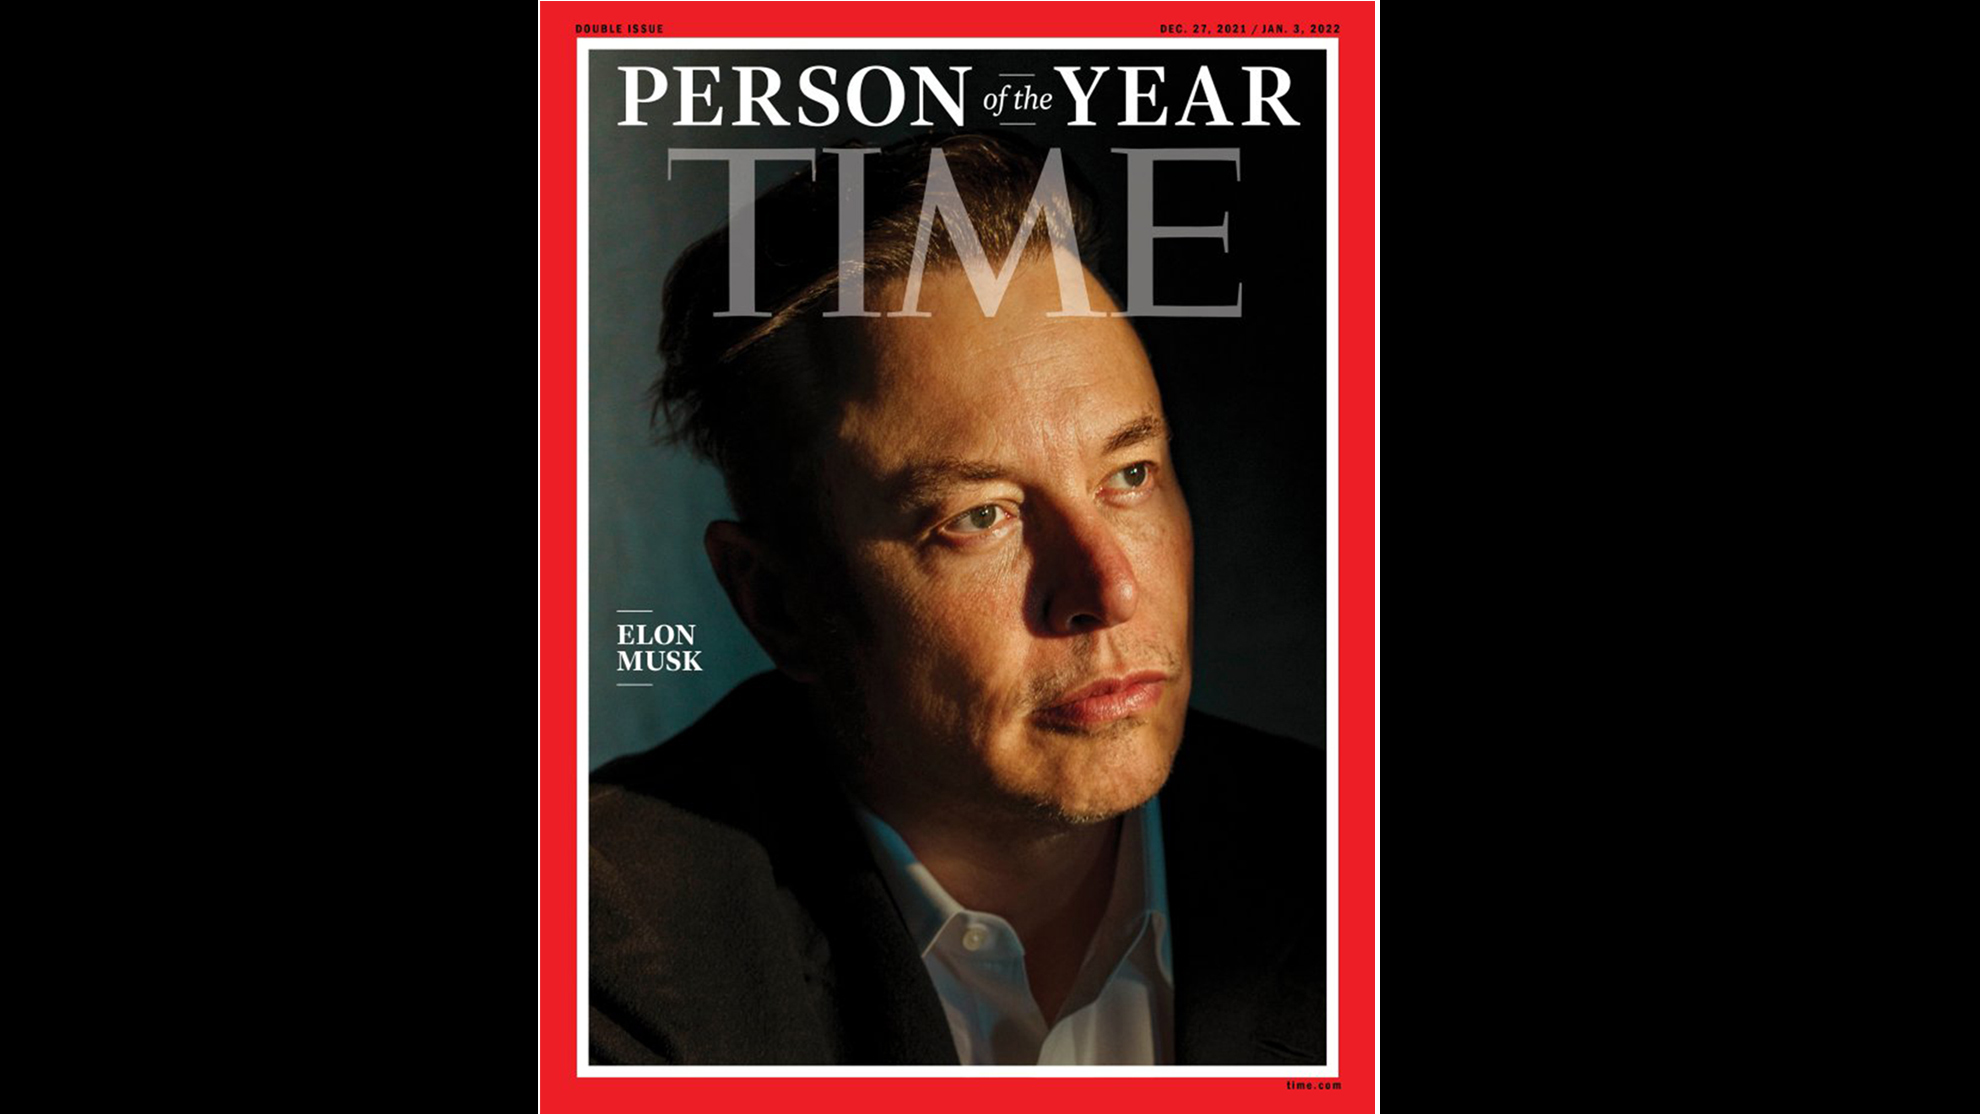 Elon Musk - Personalidad del año 2021 - Person of the Year 2021 - Time - influencia - Tesla - SpaceX